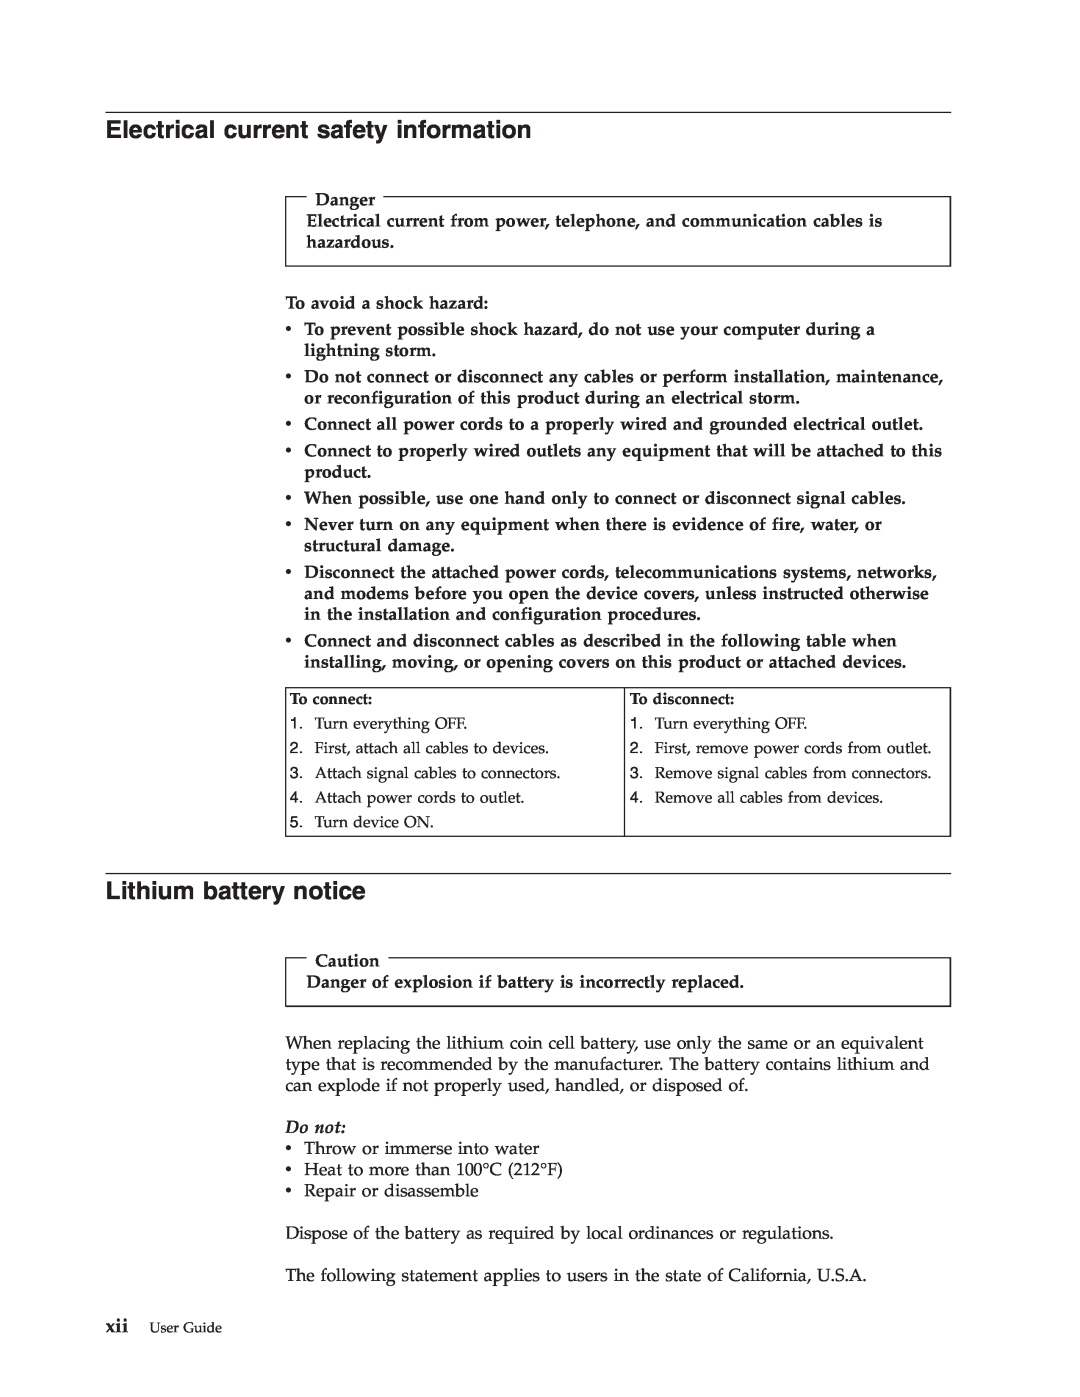 Lenovo 3000 J Series manual Electrical current safety information, Lithium battery notice, Do not 